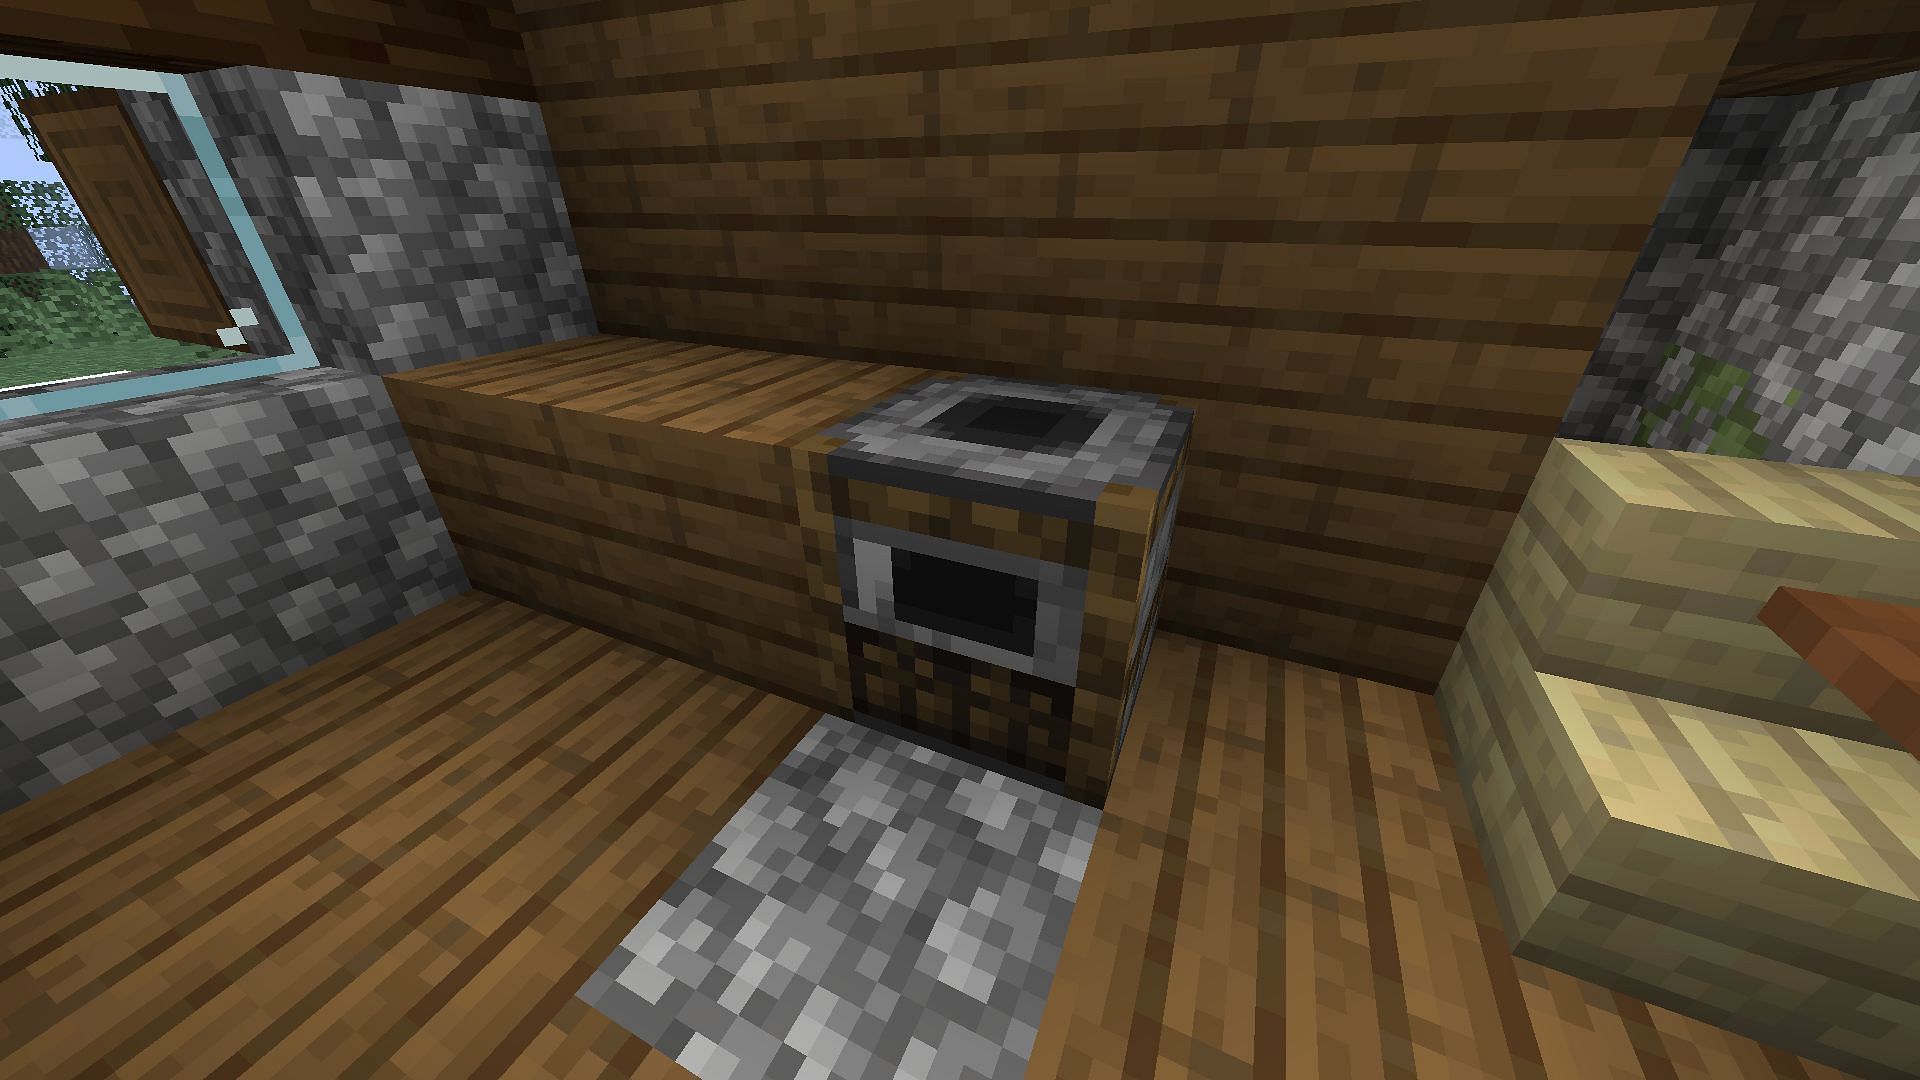 The smoker can be used to cook any food faster in Minecraft (Image via Mojang)